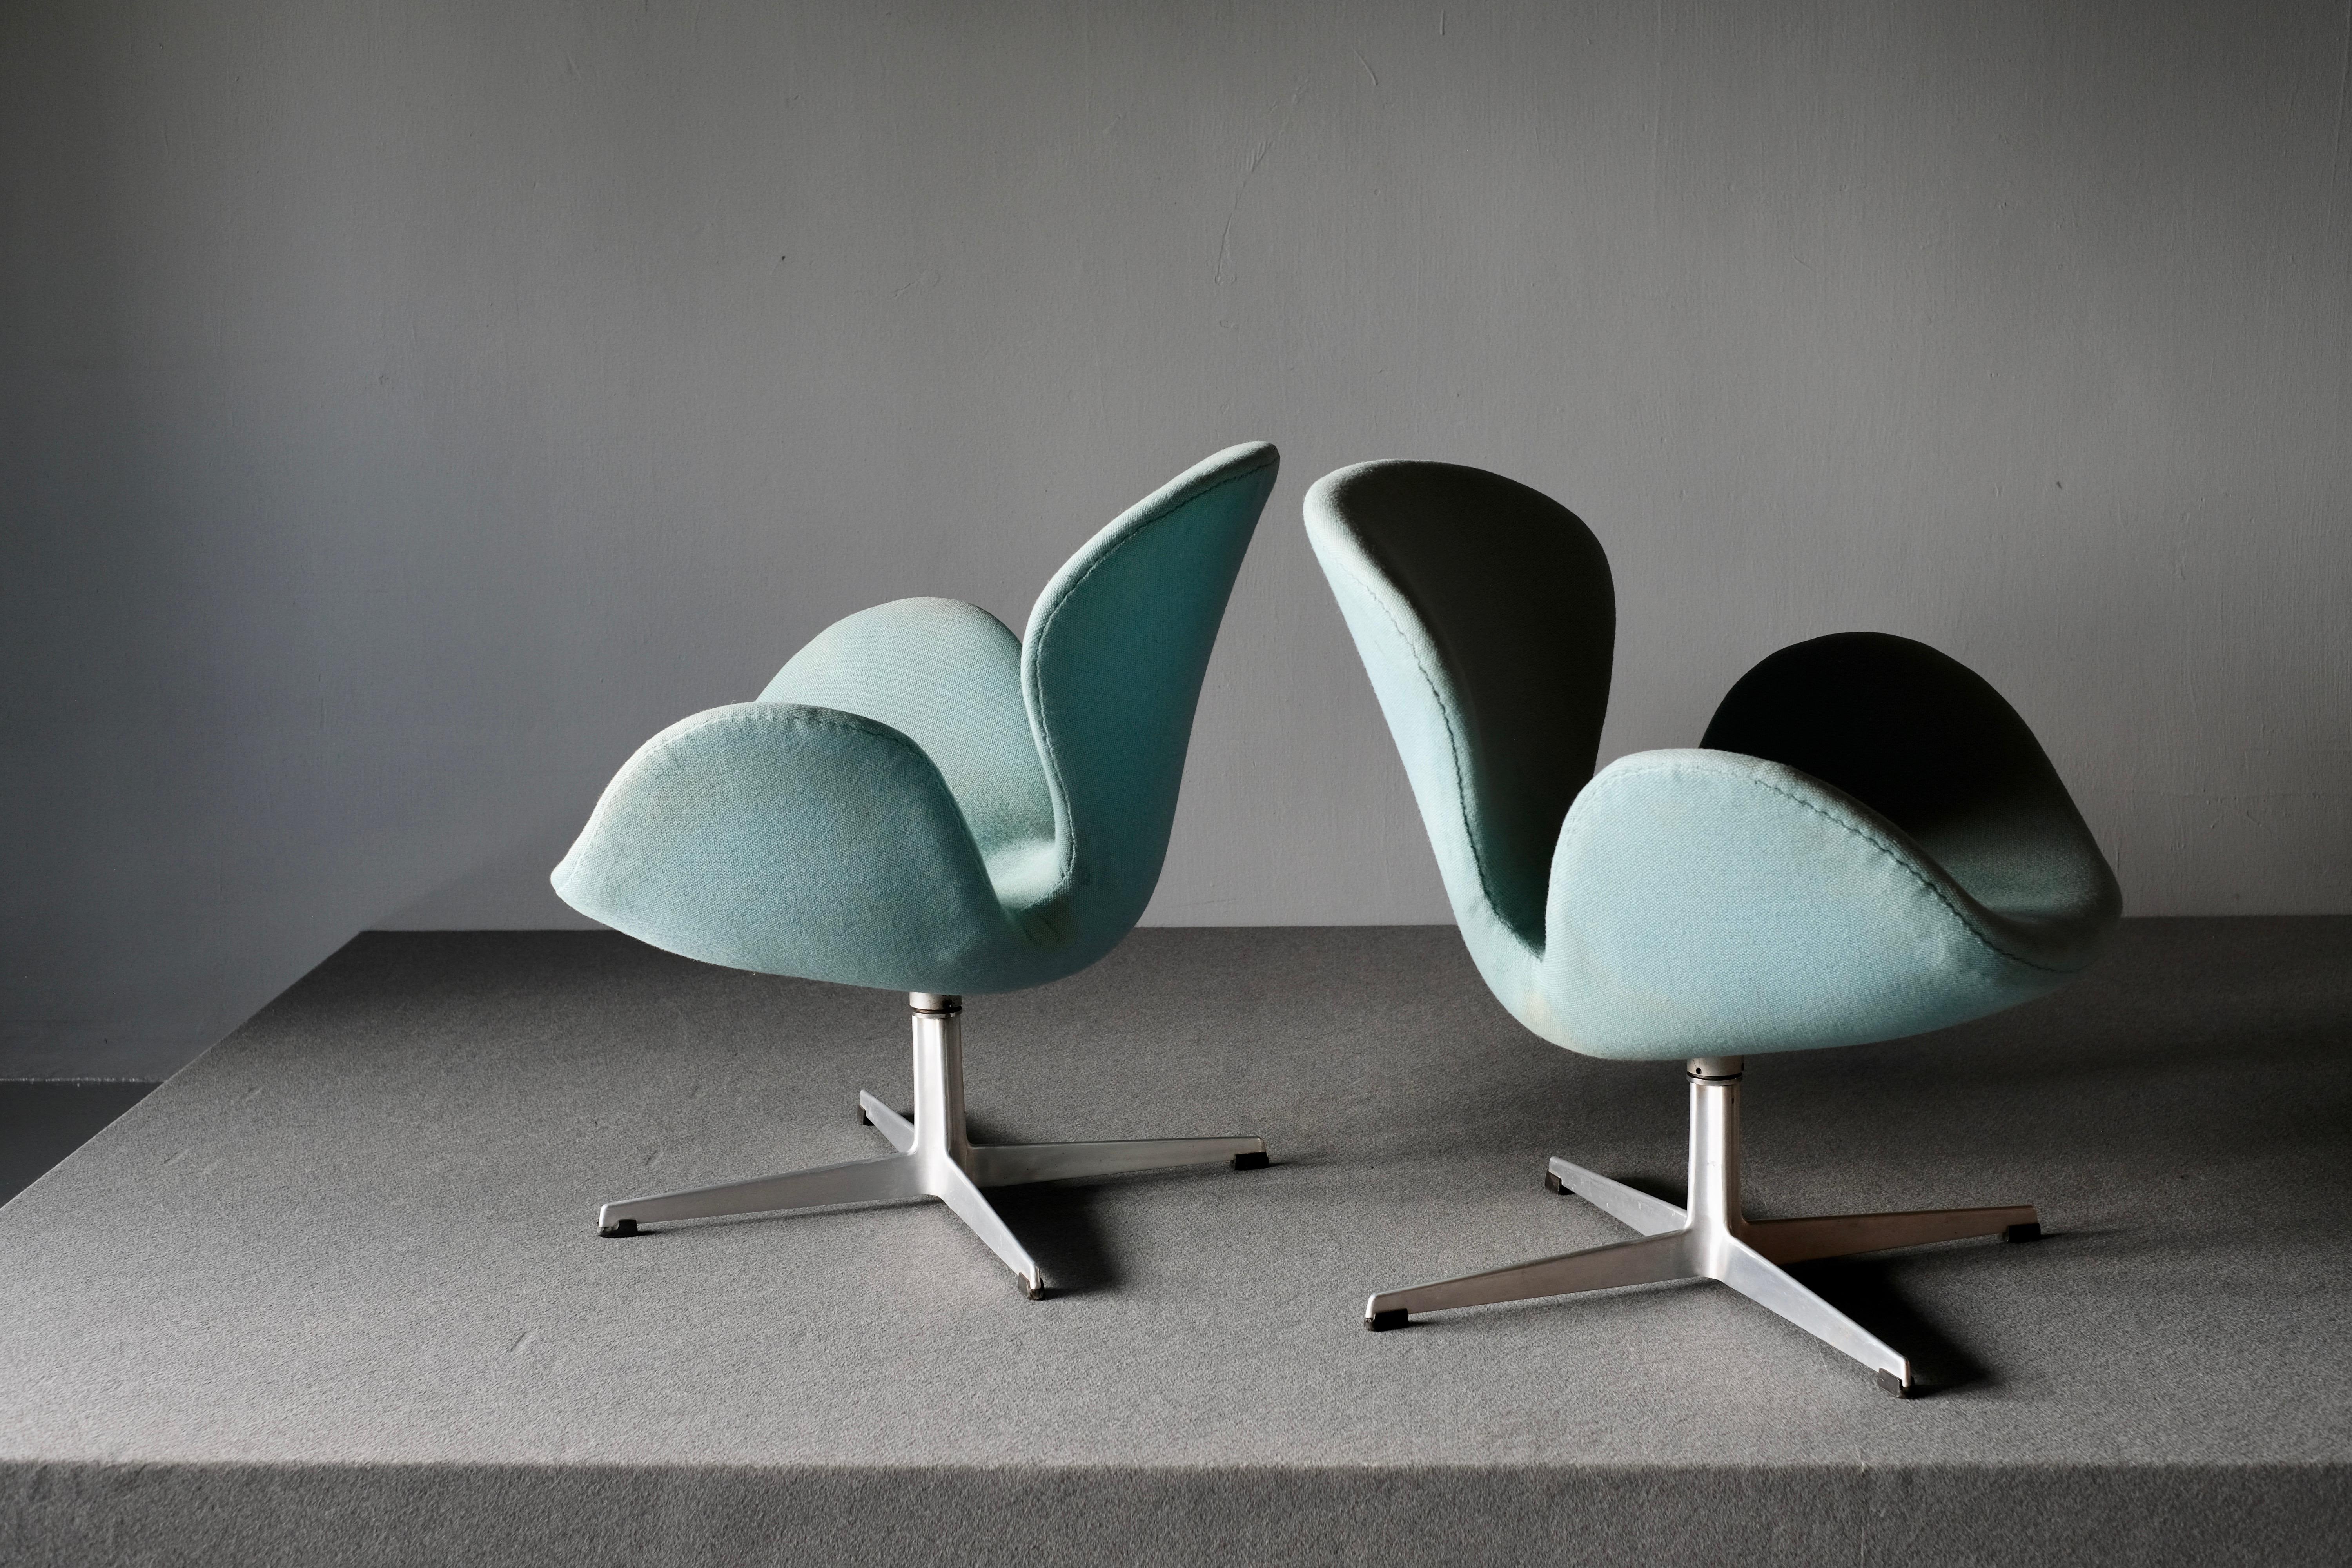 A matching pair of Swan lounge chairs model 3320. Designed by Arne Jacobsen for the SAS Royal Copenhagen Hotel which opened in 1960. It is produced by Fritz Hansen. Each chair is upholstered in fully original distinctive pigeon blue upholstery. The